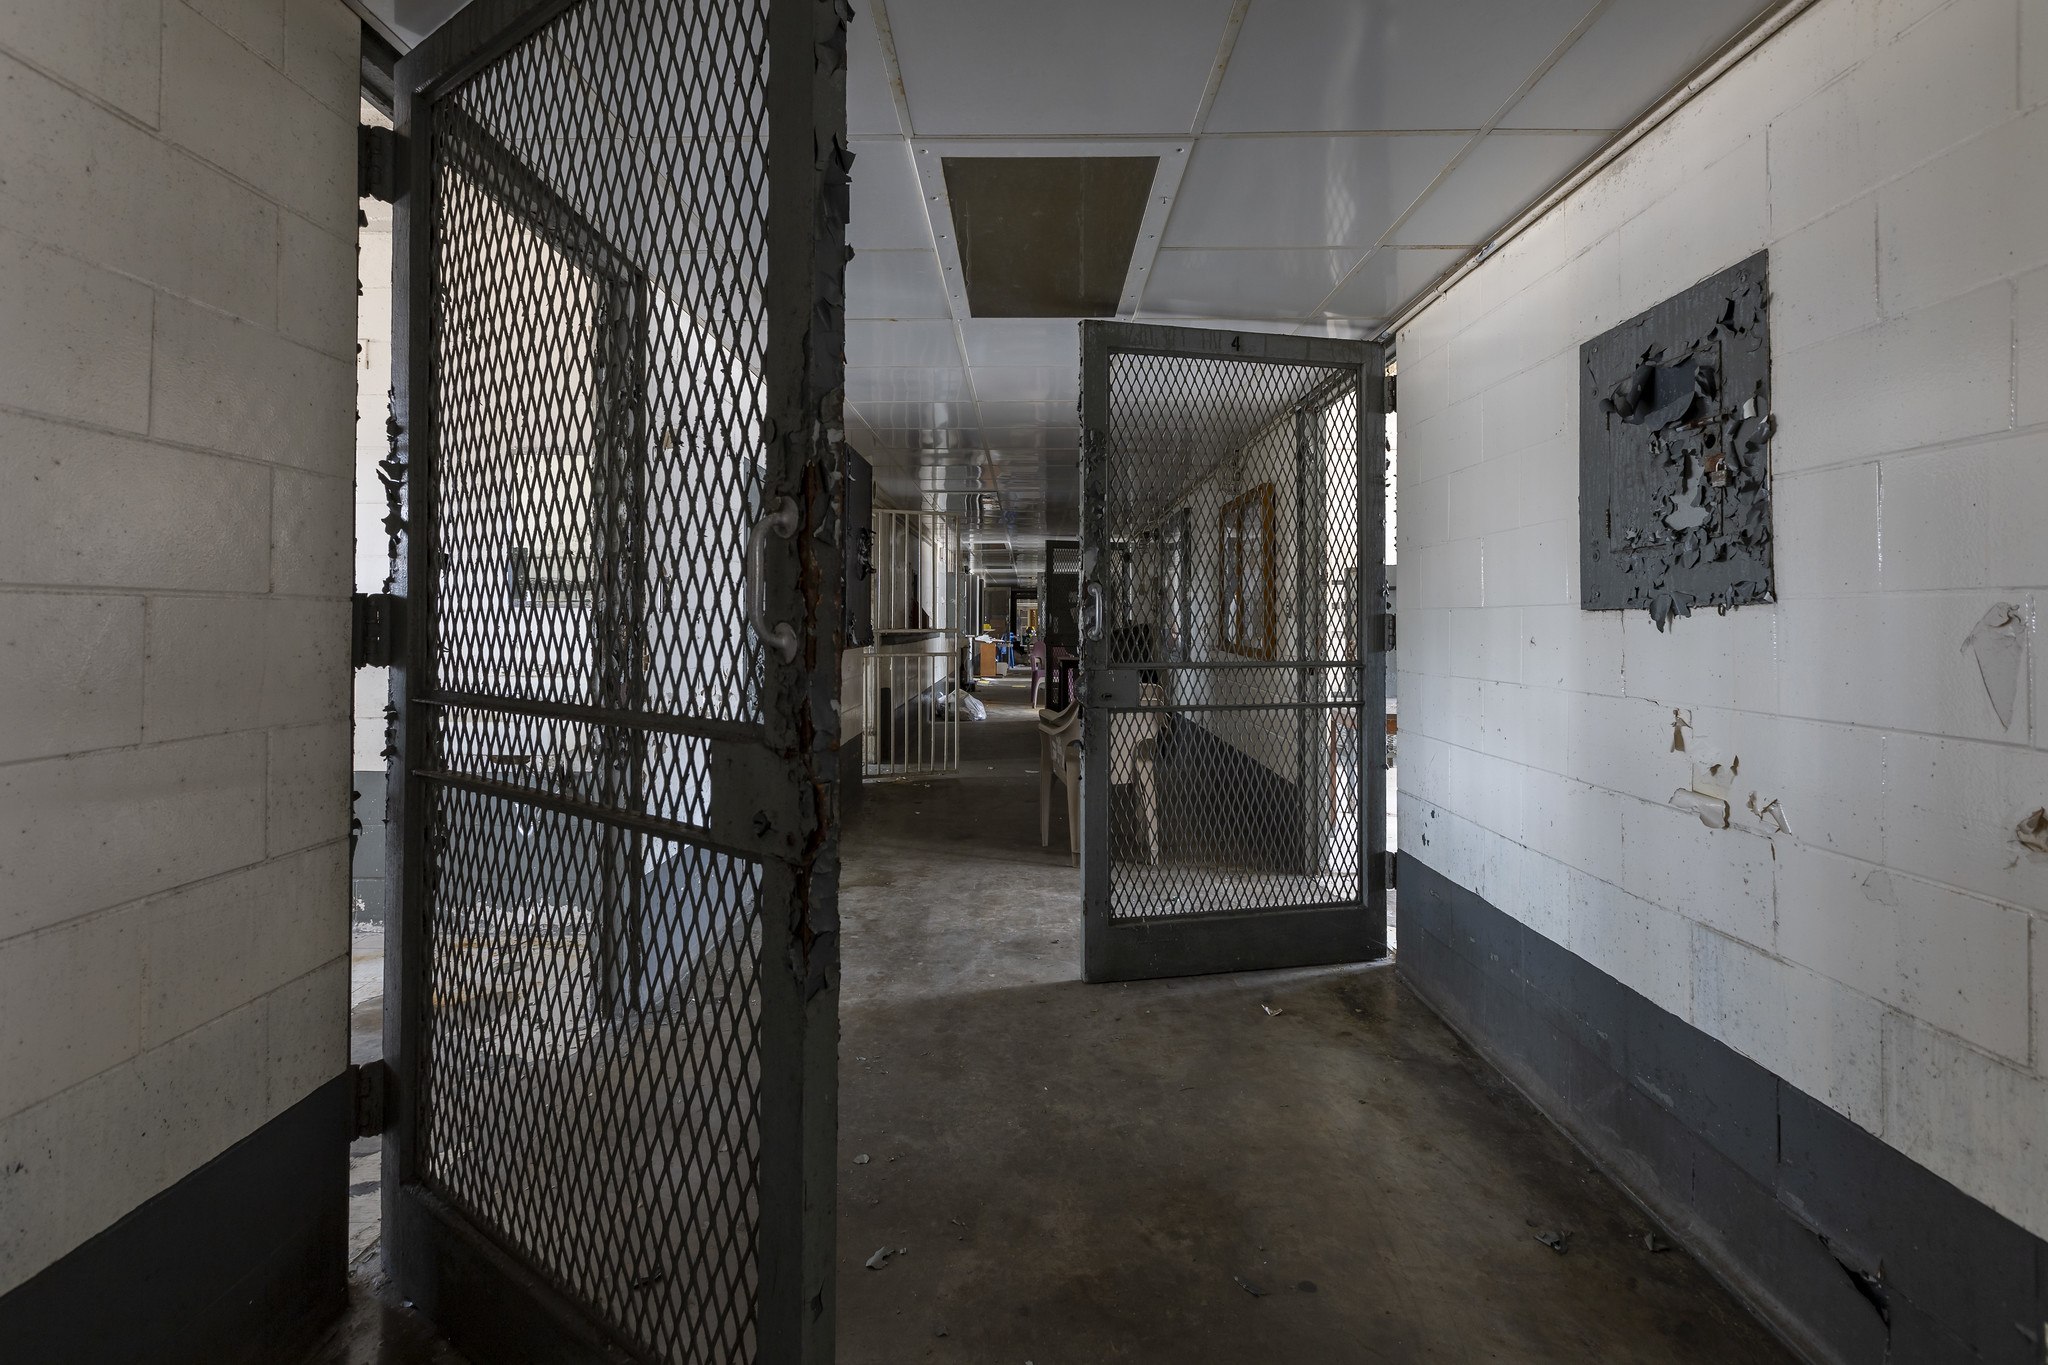 Abandoned State Prison